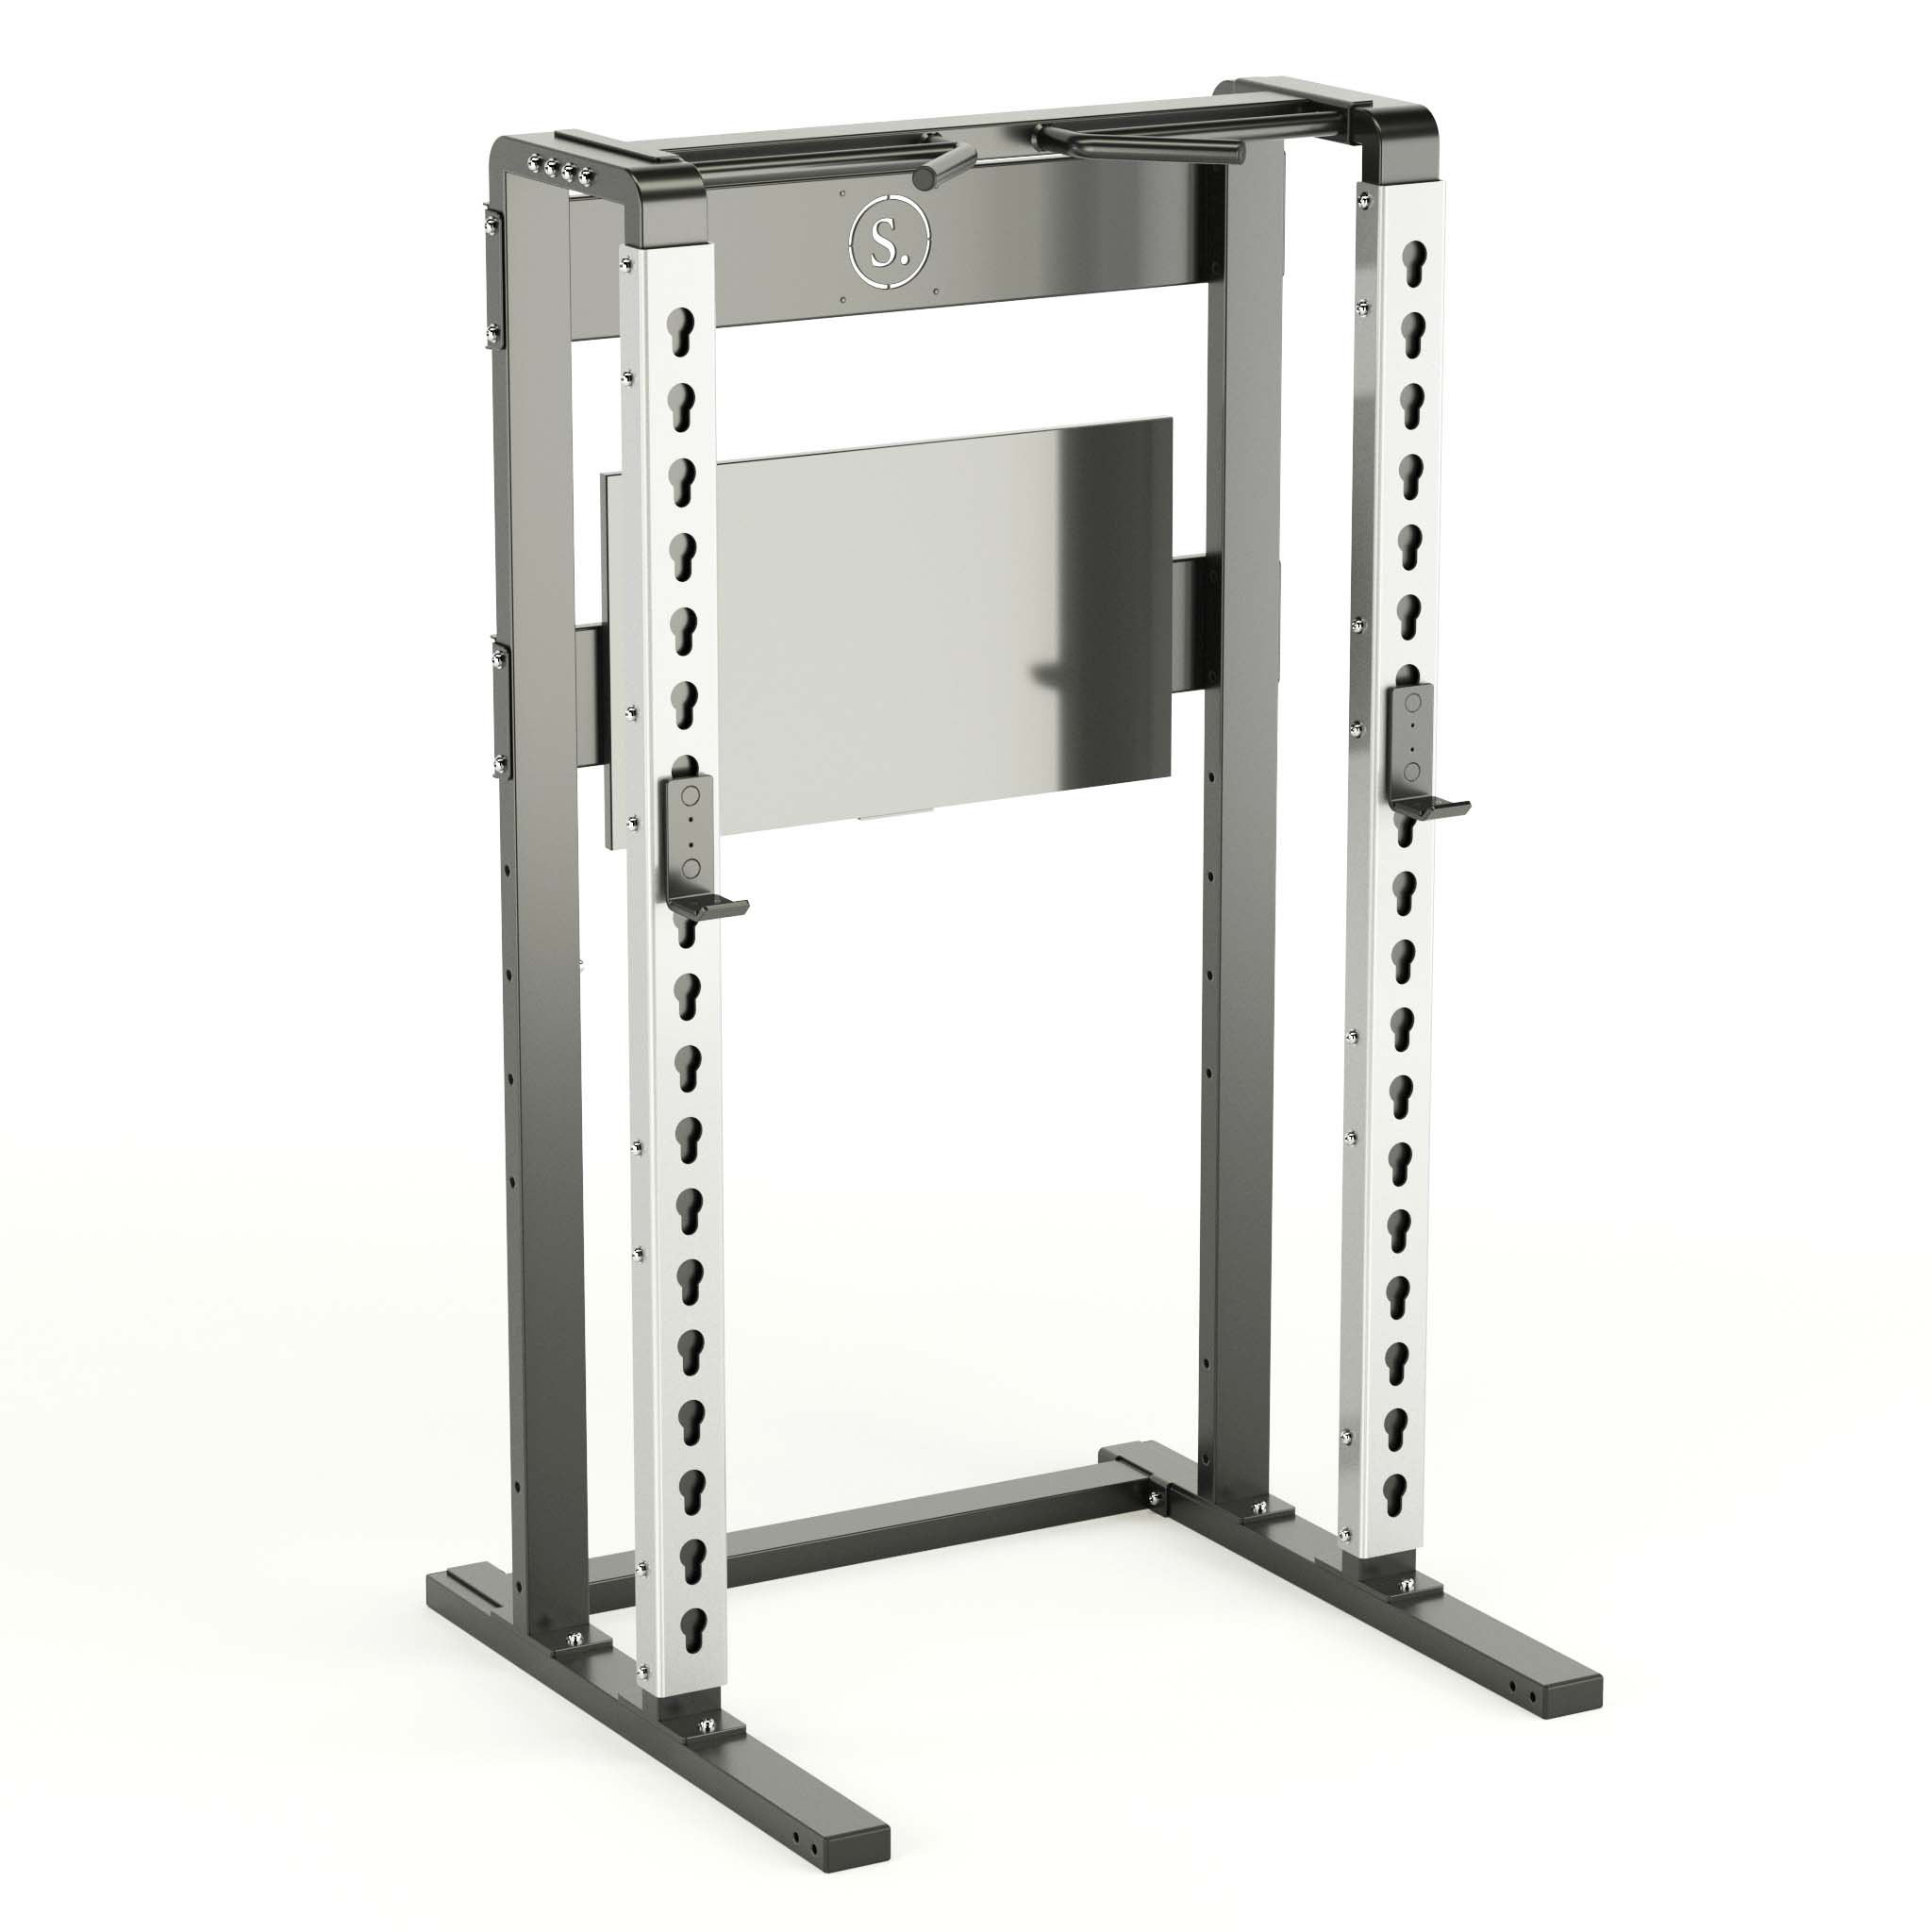 Solo Squat Rack Plus with multi-grip in silver